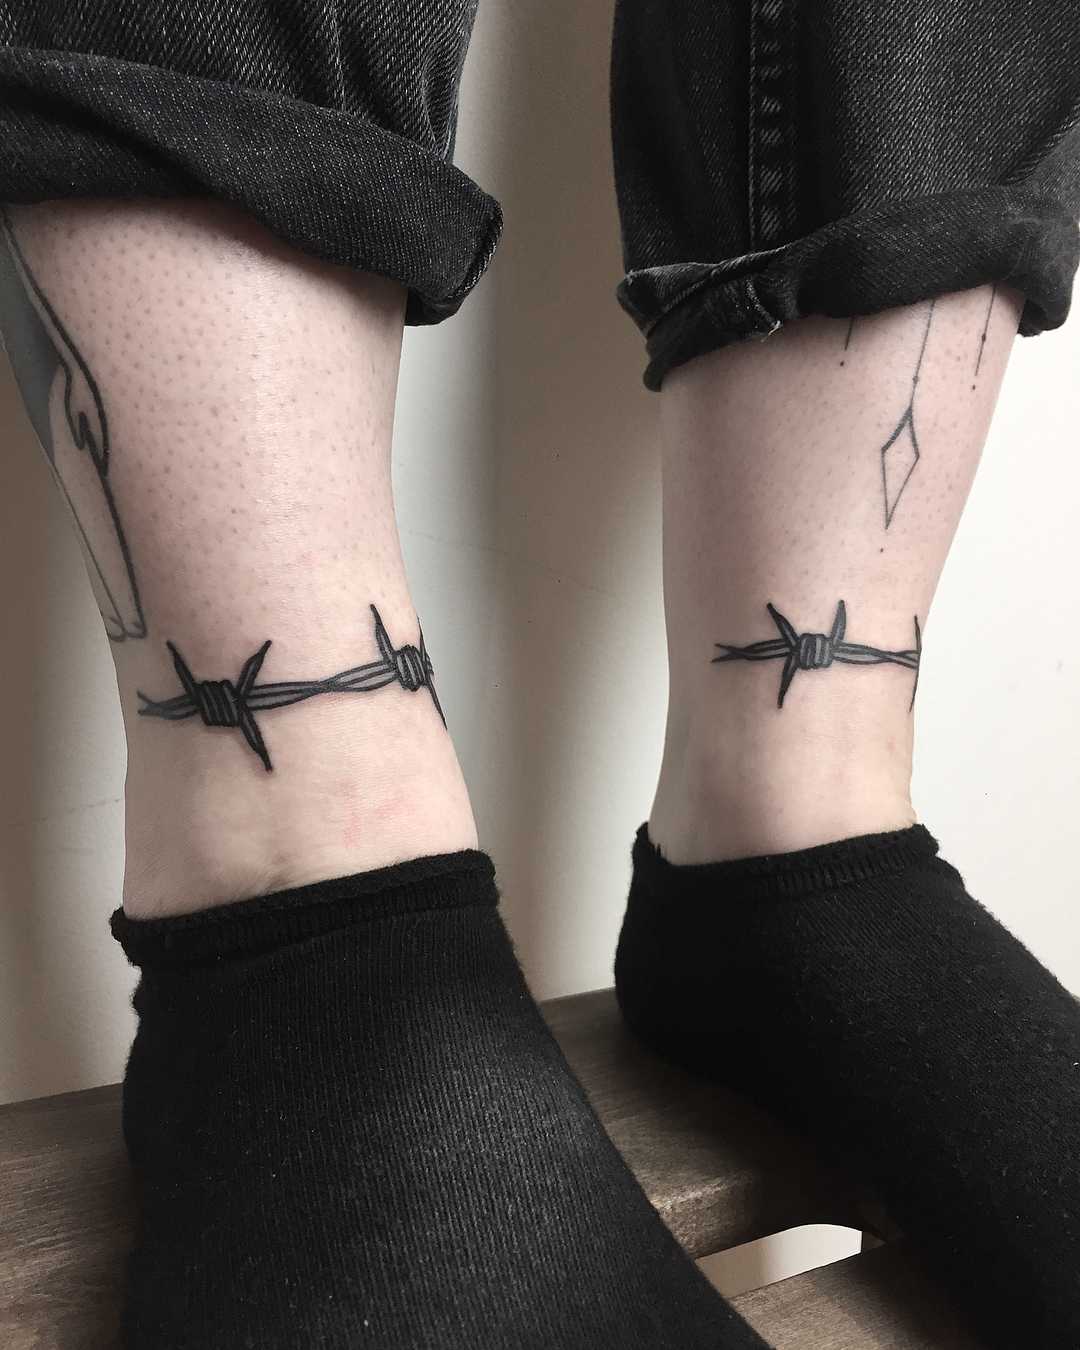 Matching barbed wire details by Loz Thomas